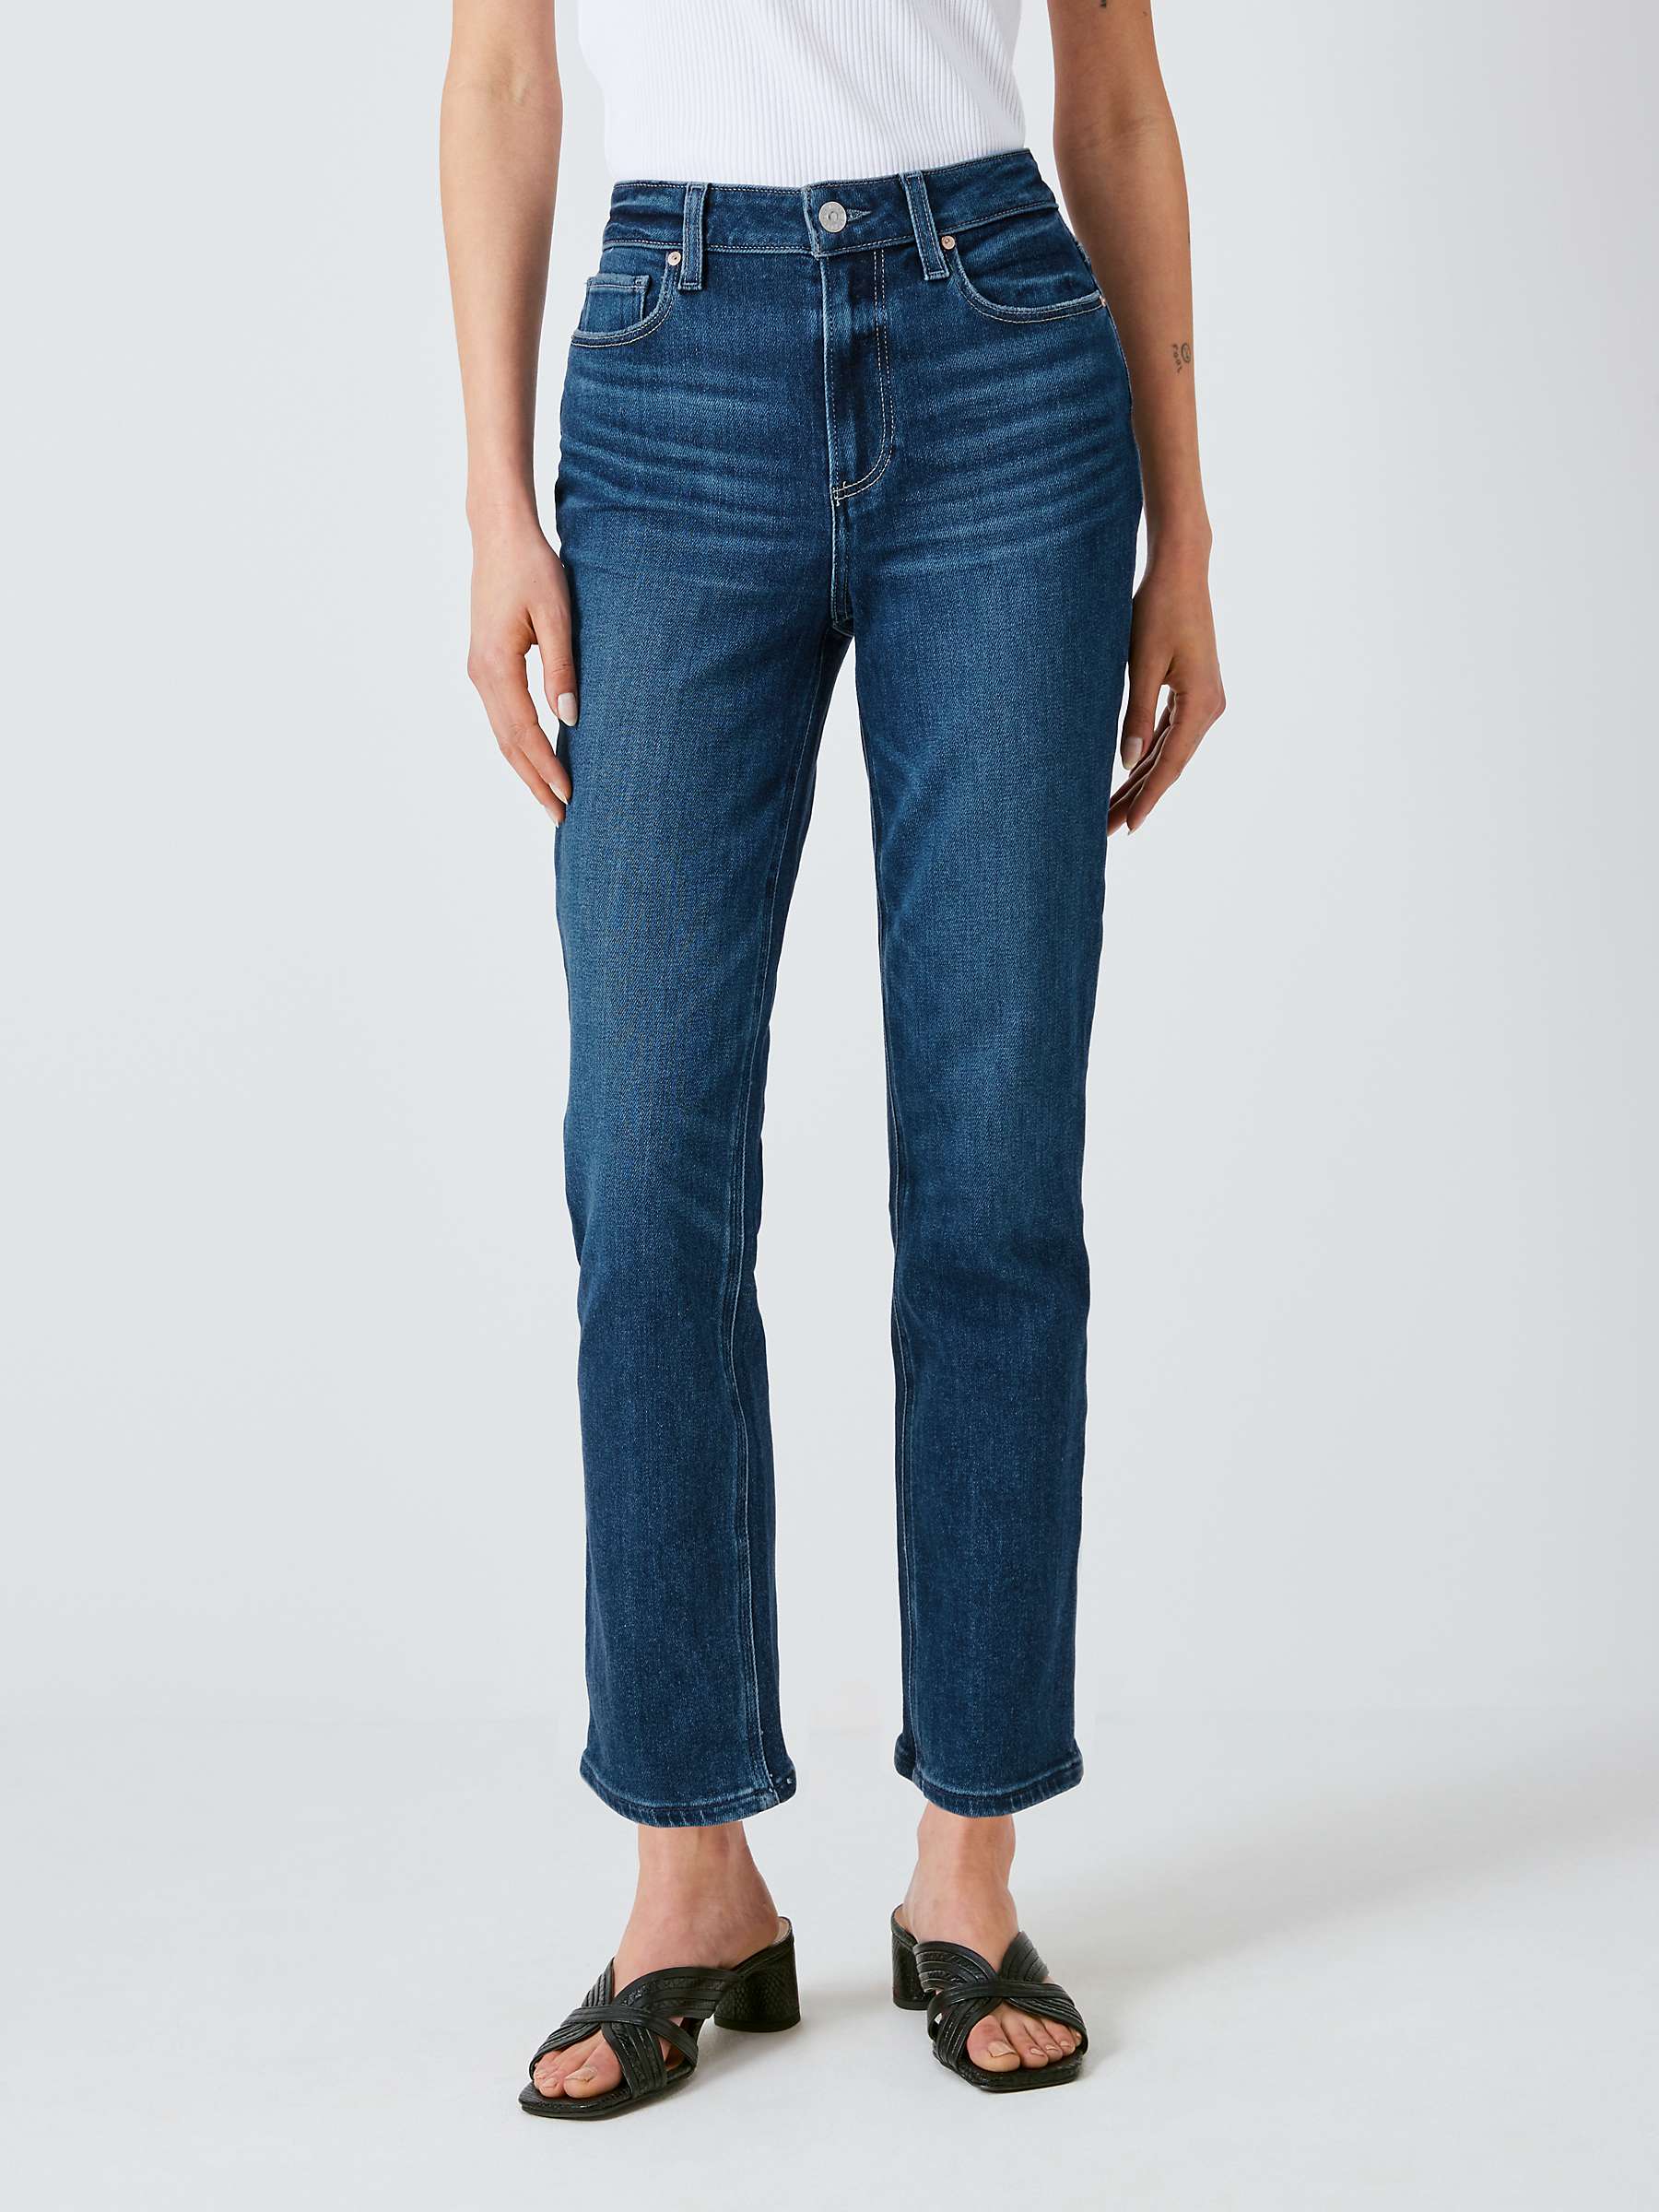 Buy PAIGE Cindy Cropped Jeans, Soleil Online at johnlewis.com